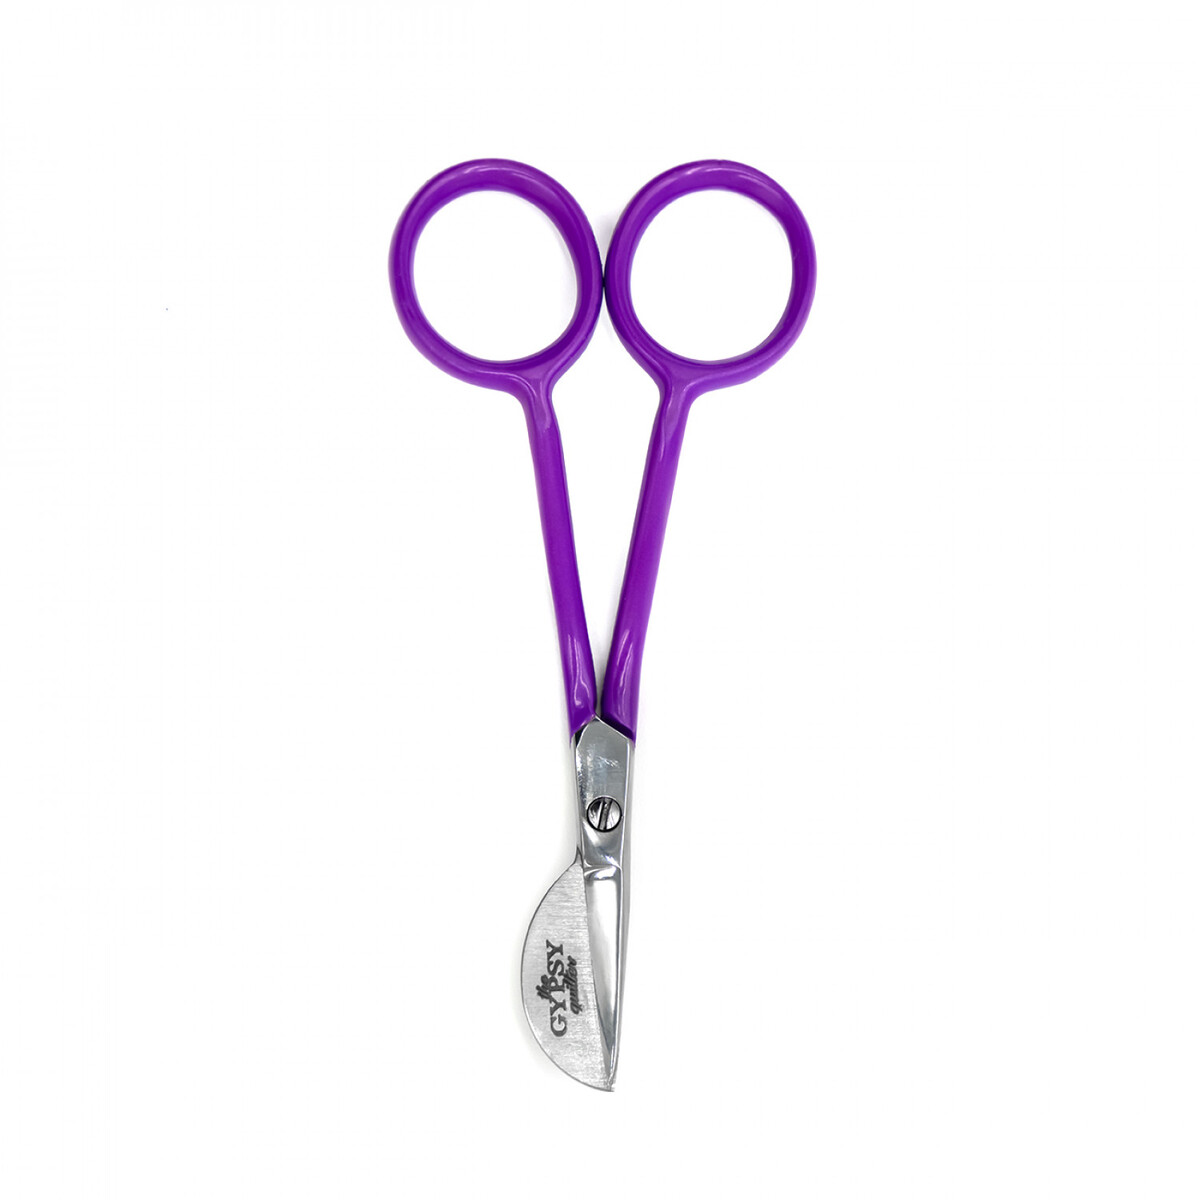 Duckbill Scissors: What They Are And How To Use Them